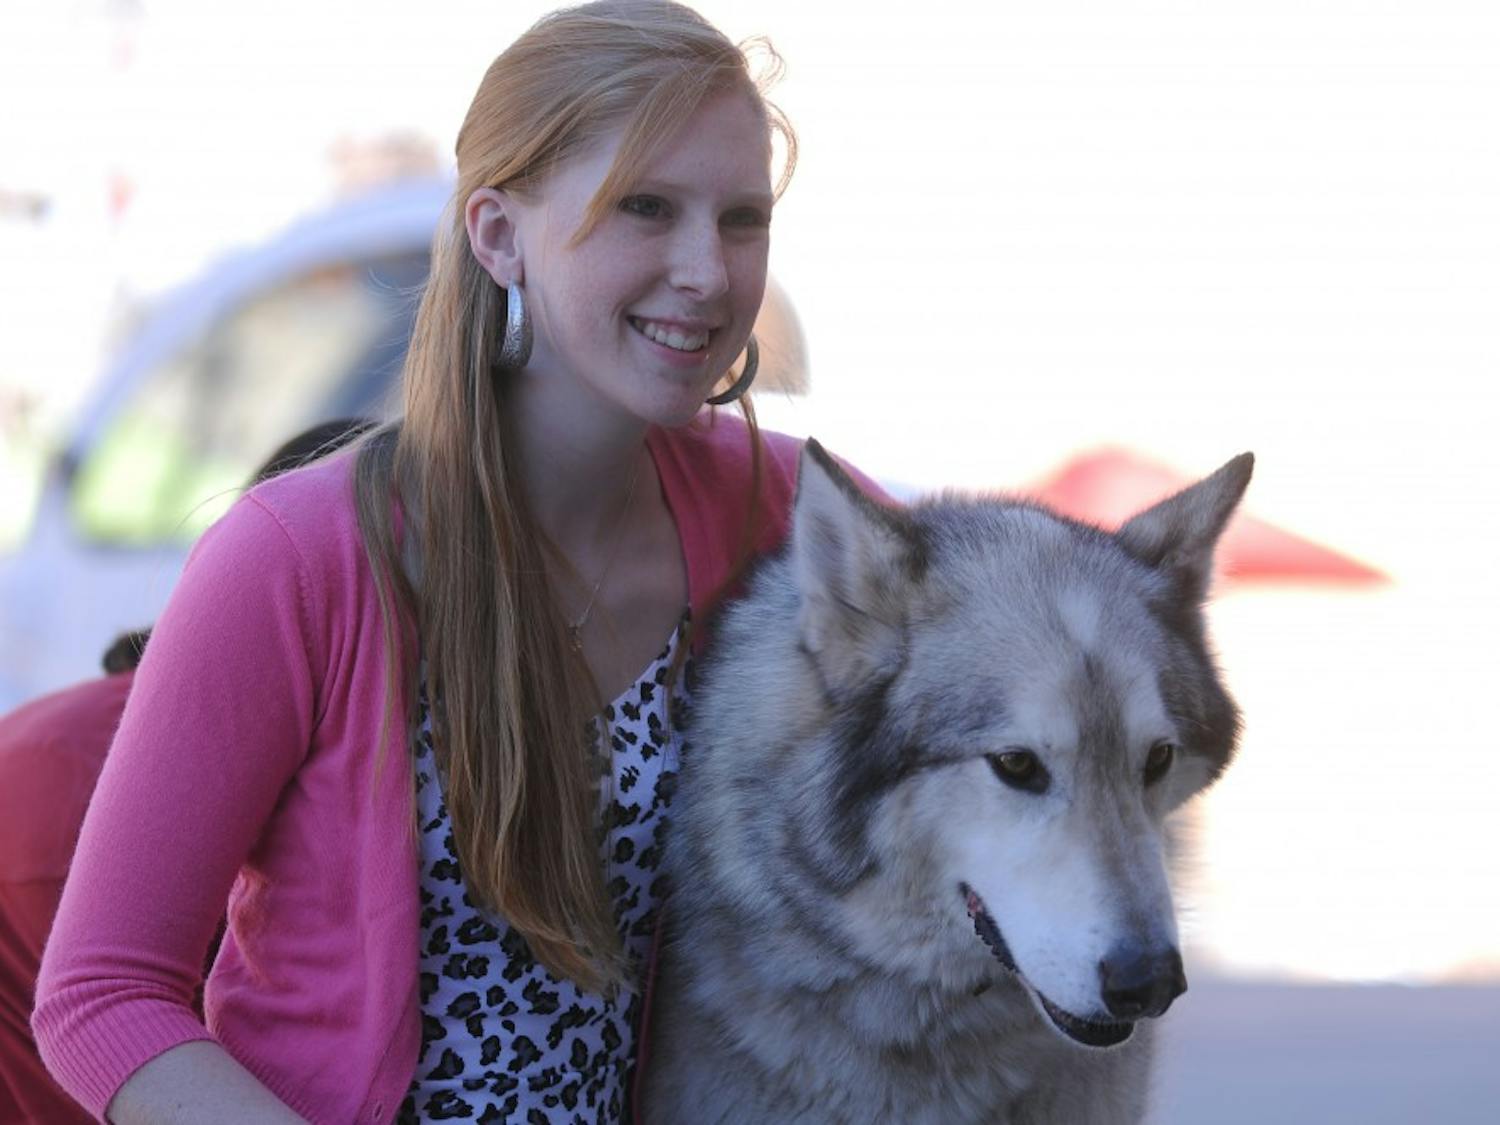 UNM student Devon Rosenkoetter poses with a wolf from the Wanagi Wolf Fund and Rescue at Smith Plaza last Friday. Only 58 Mexican gray wolves survive in the wild in the state, but the UNM Wilderness Alliance and Biology Undergraduate Society are trying to get the community involved in protecting the endangered species.
